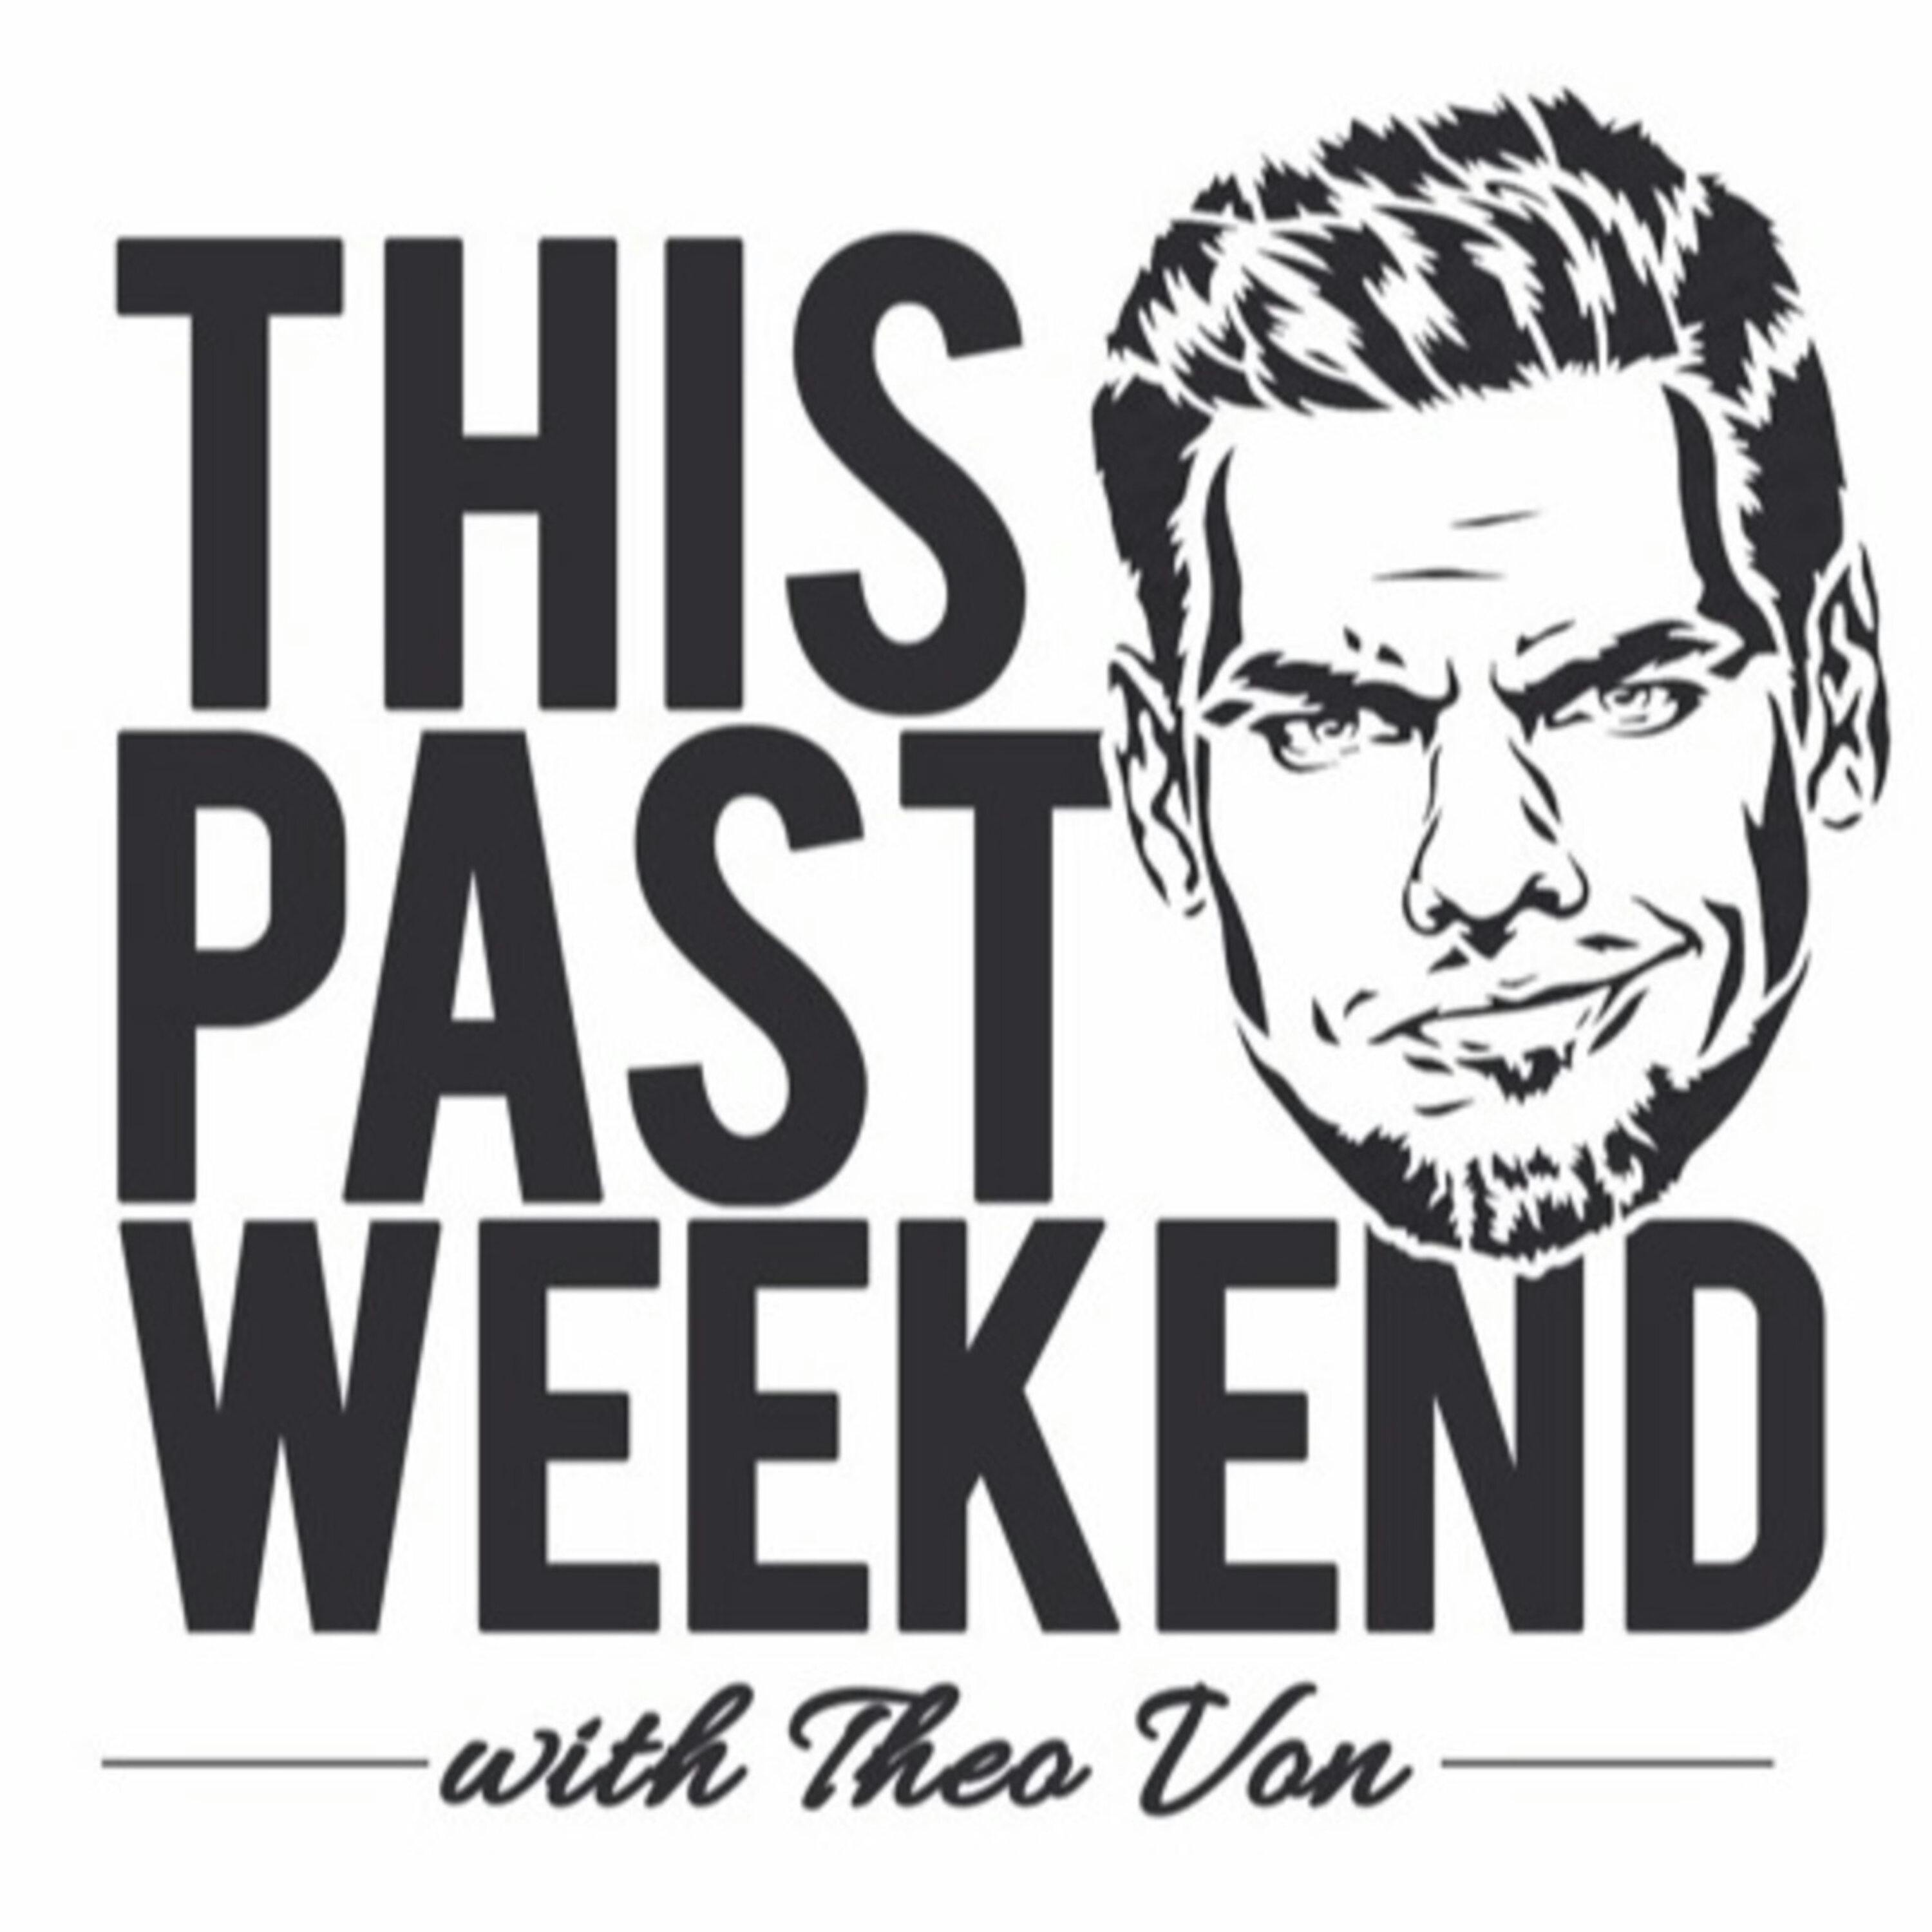 11-13-17 | This Past Weekend #51 by Theo Von